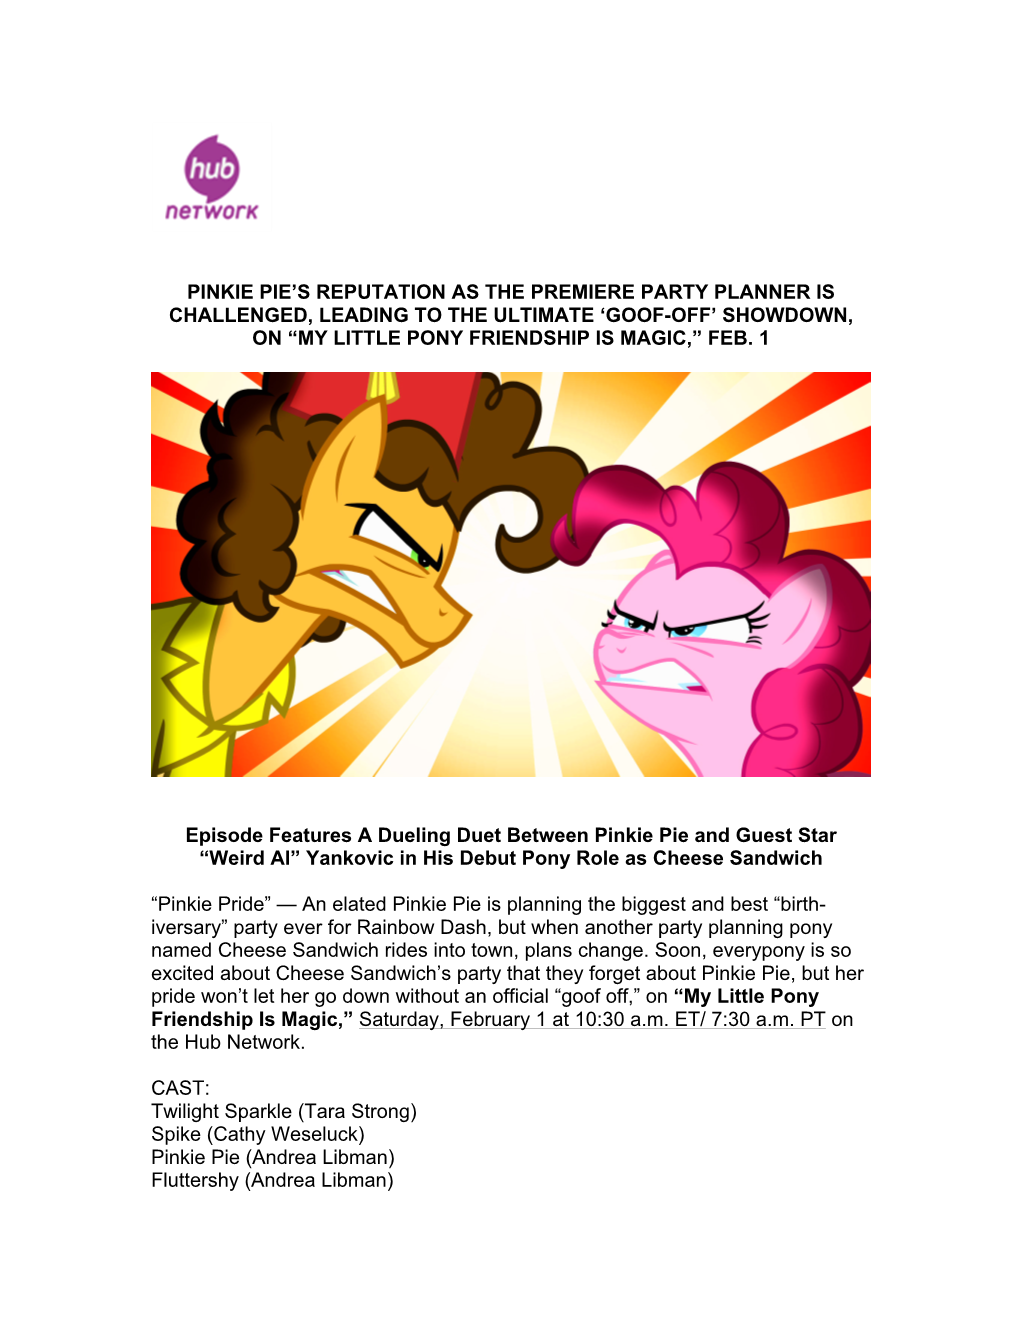 Pinkie Pie's Reputation As the Premiere Party Planner Is Challenged, Leading to the Ultimate